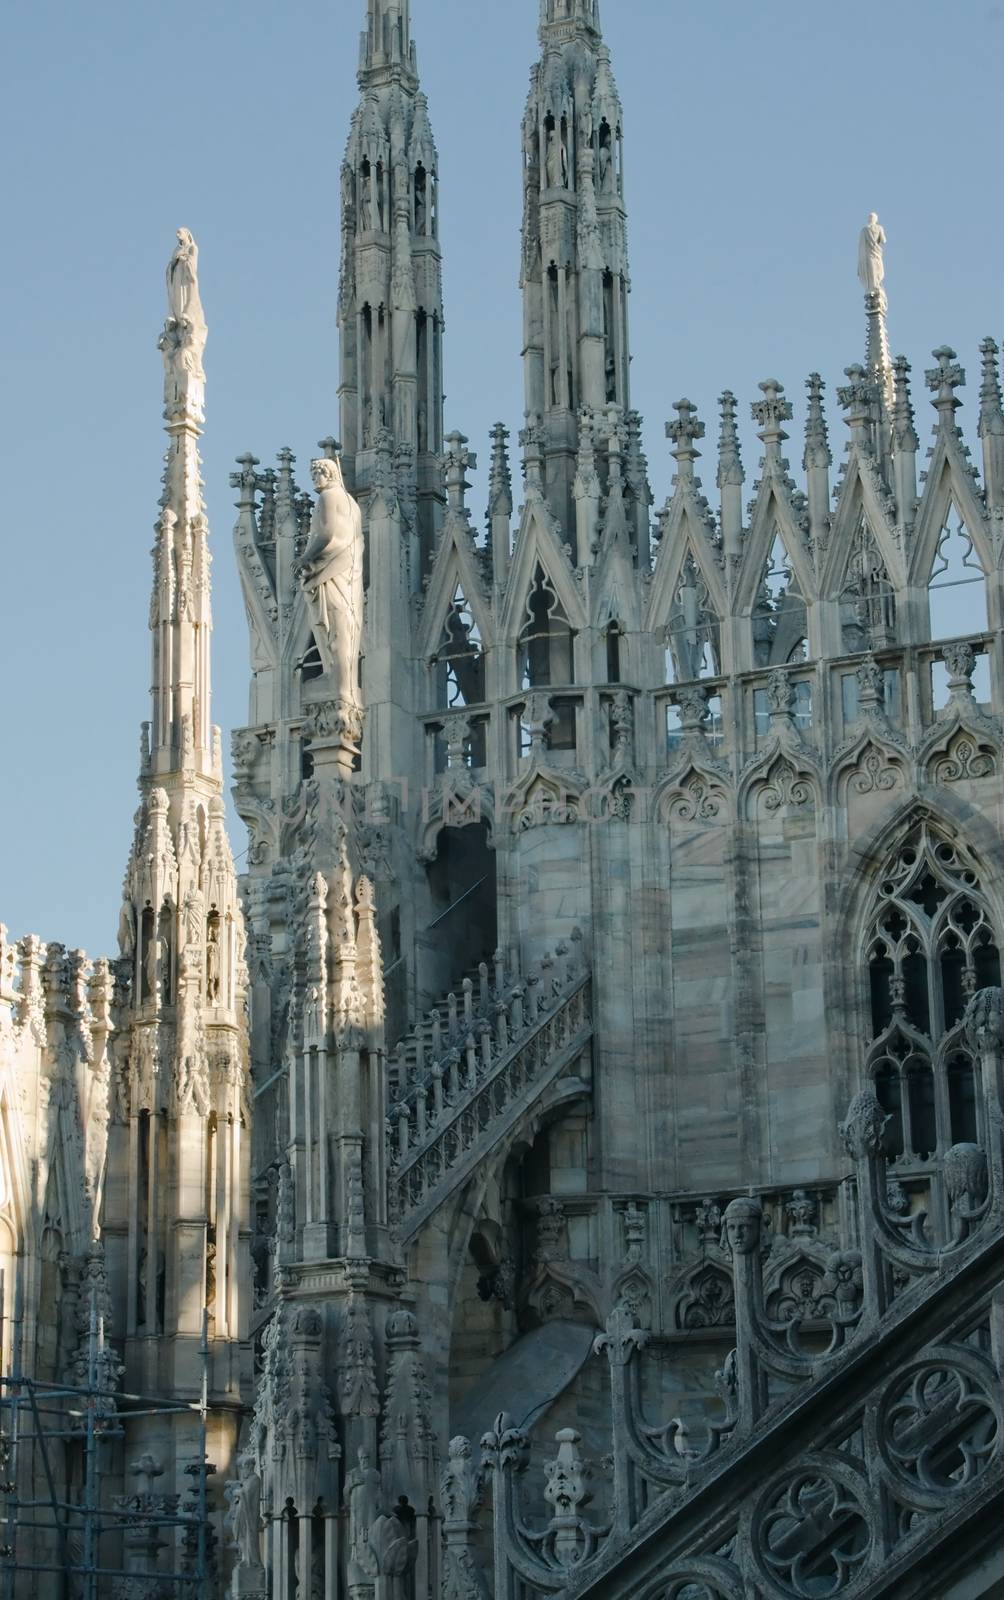 Silhouettes of statues on the roof of the Duomo in Milan